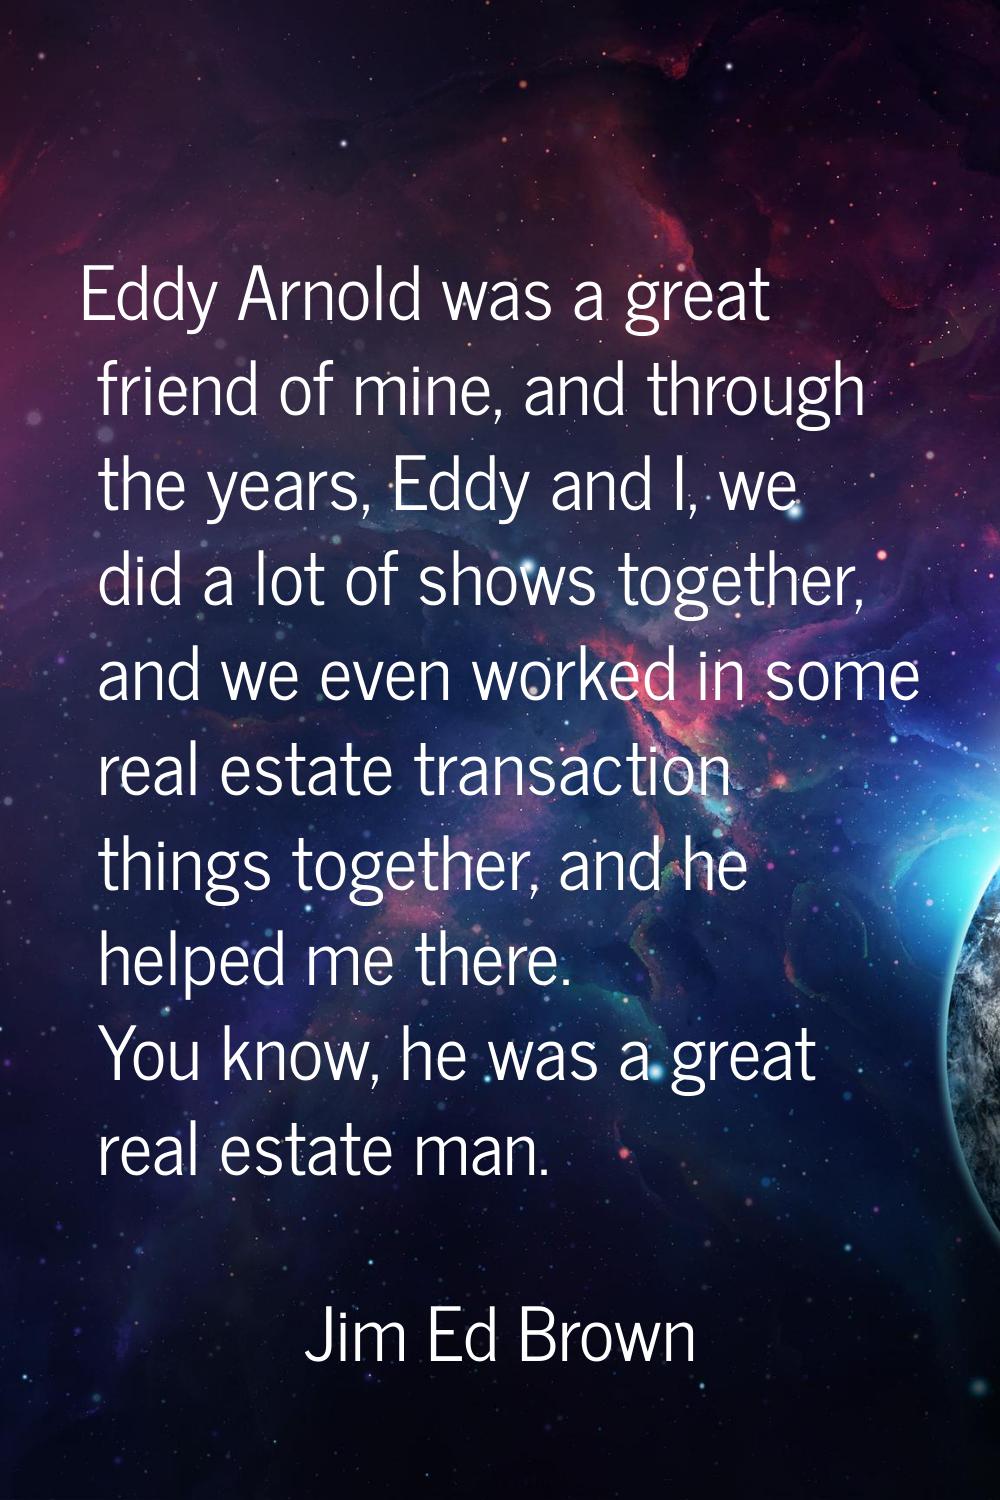 Eddy Arnold was a great friend of mine, and through the years, Eddy and I, we did a lot of shows to